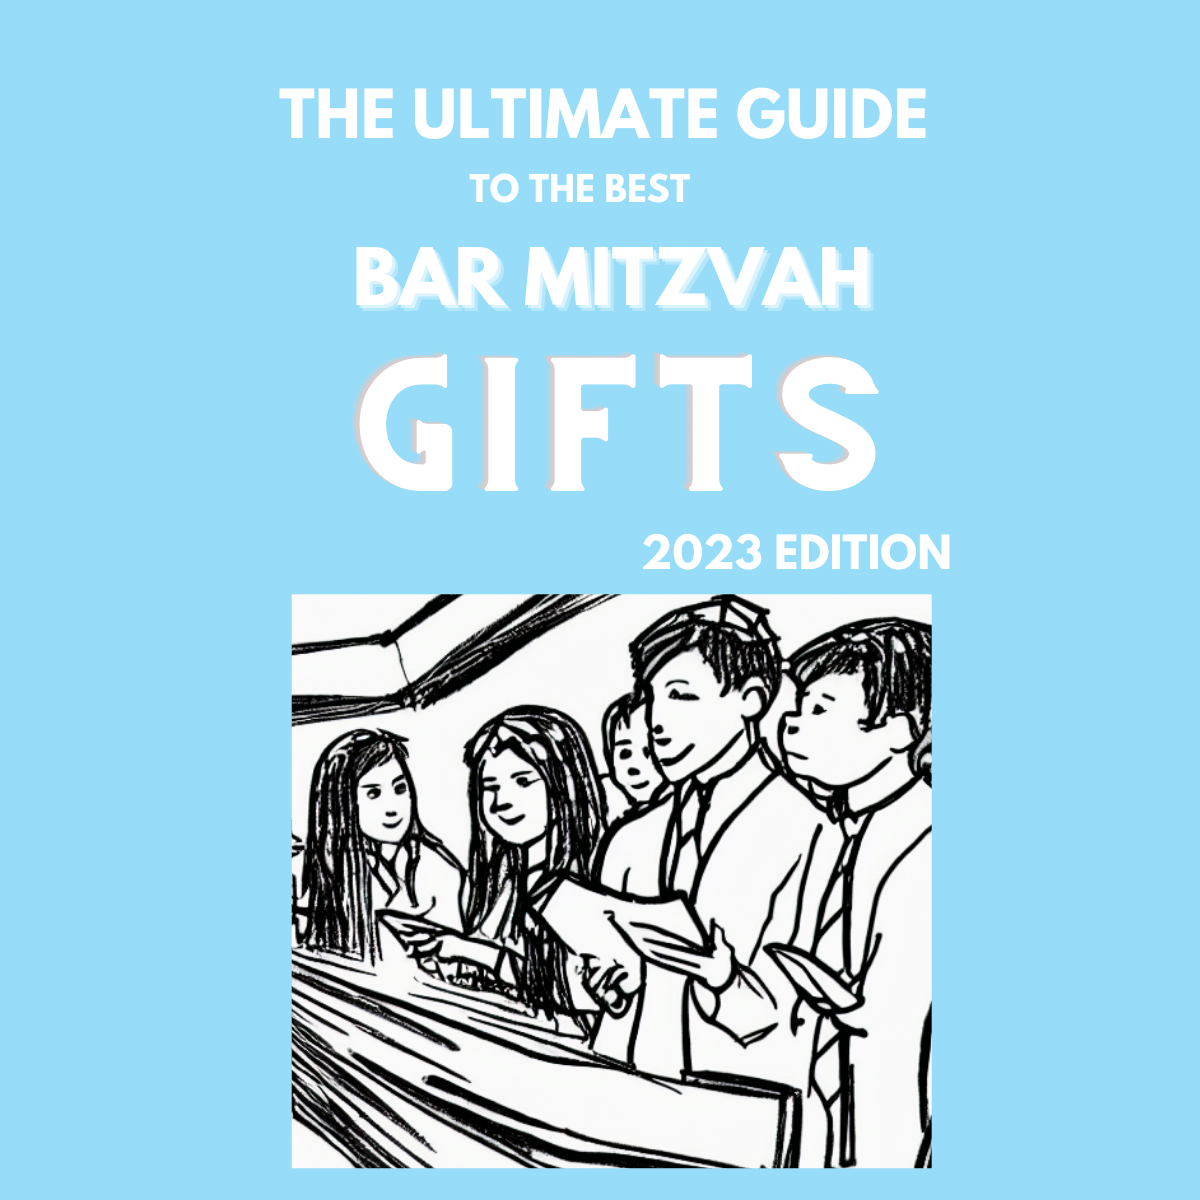 The Ultimate Guide to the Best Bar Mitzvah Gifts (2023Edition)